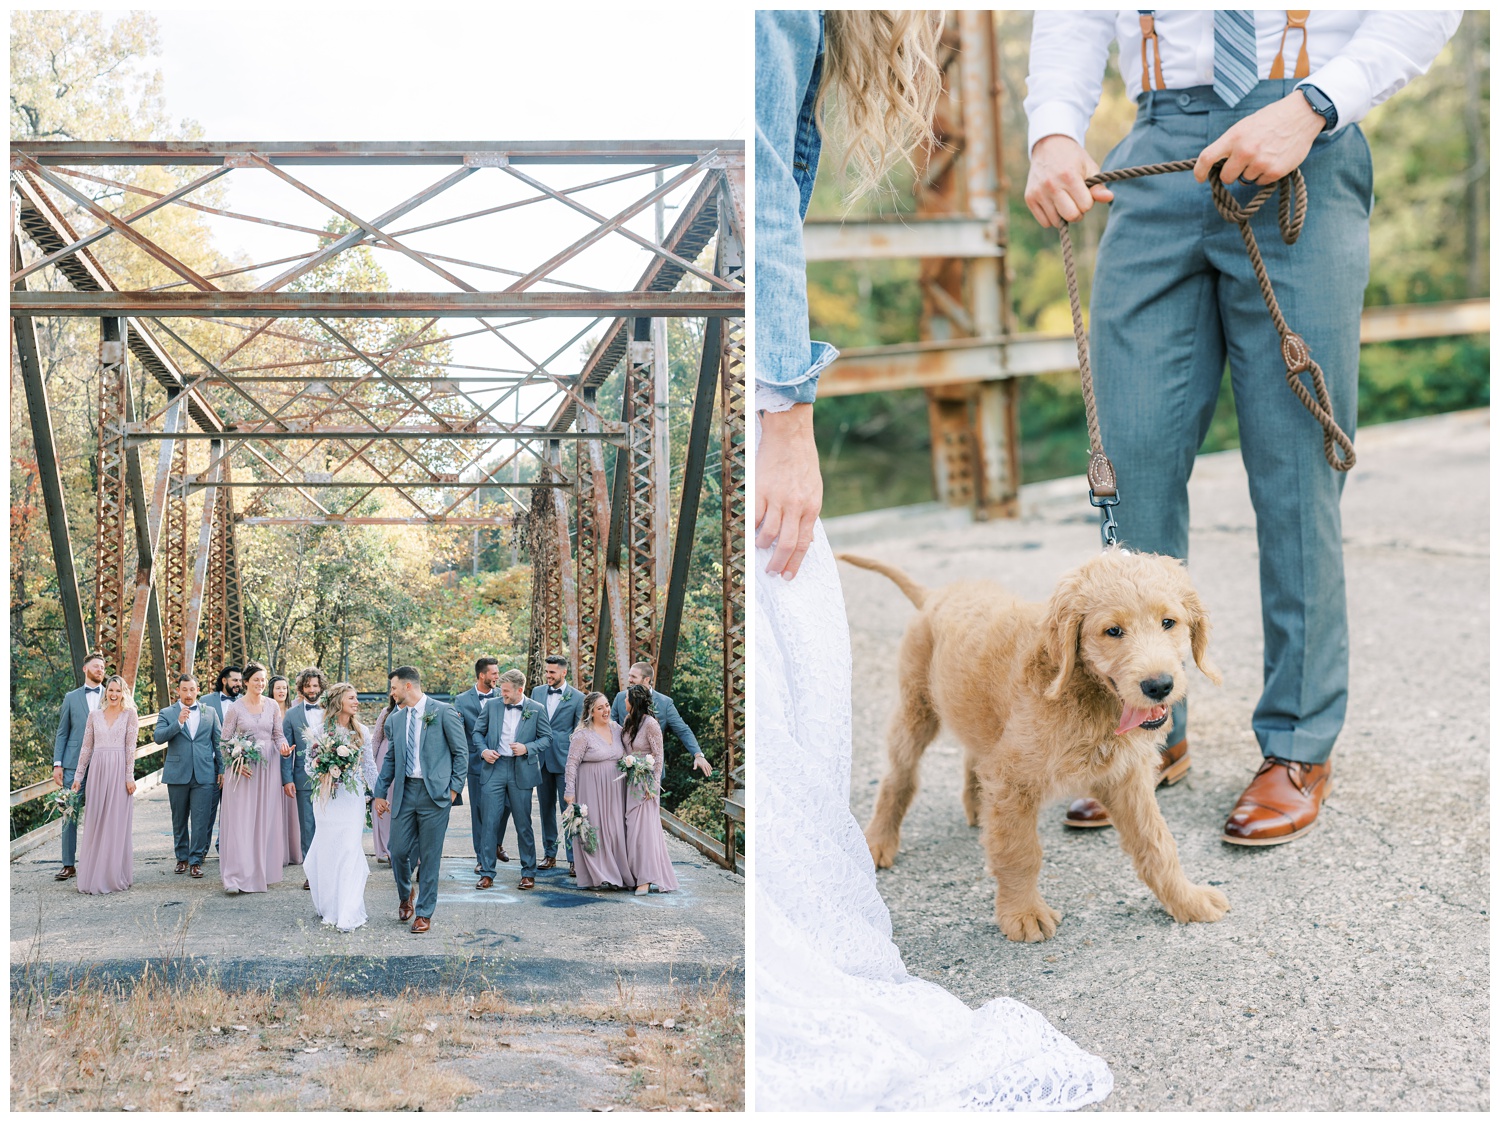 Bridal party in Illinois wedding with puppy